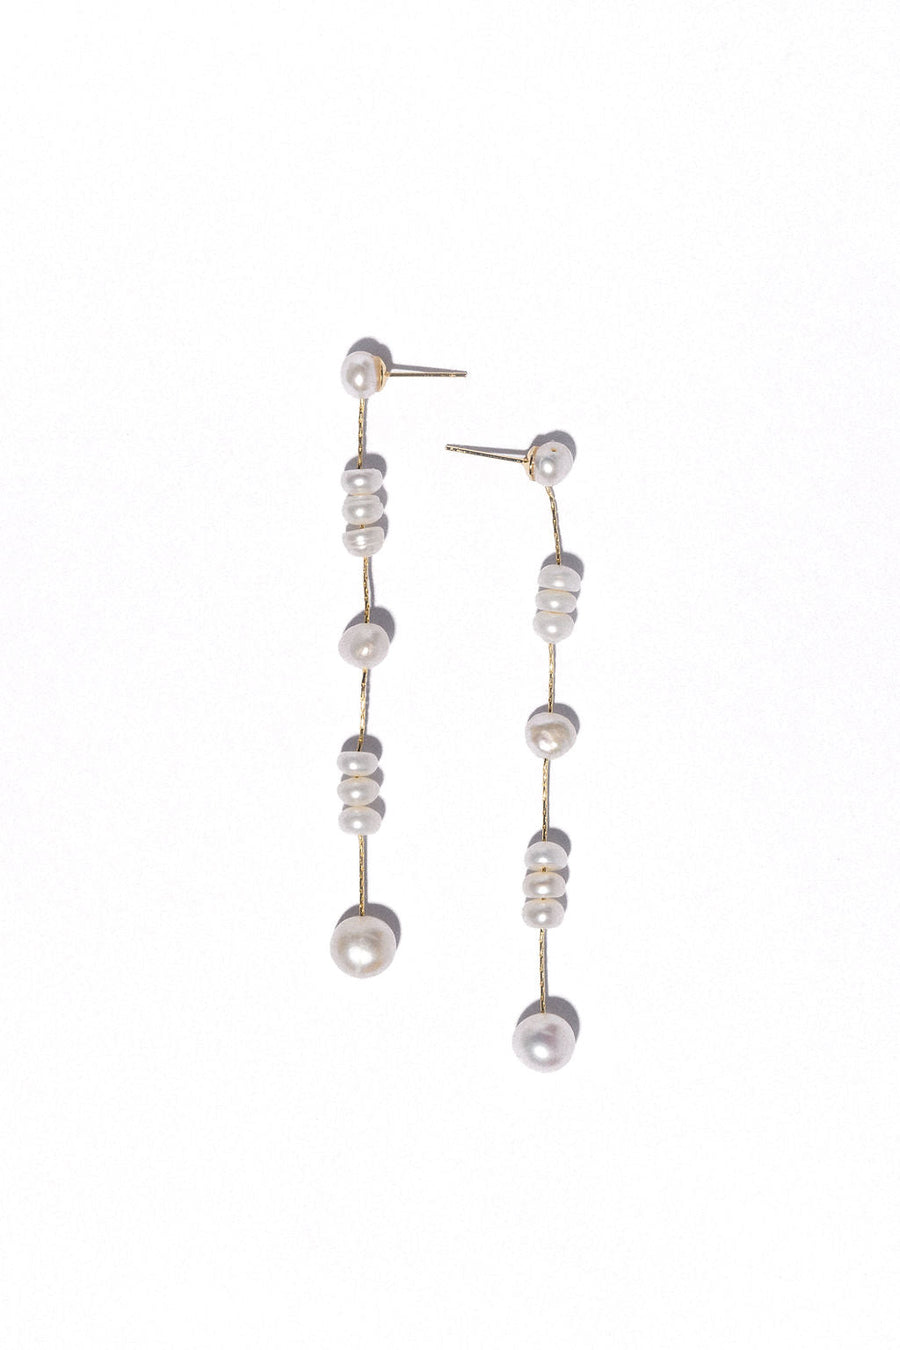 DLUXCA Jewelry Gold / Pearl Copy of Maldives Nights Pearl Earrings